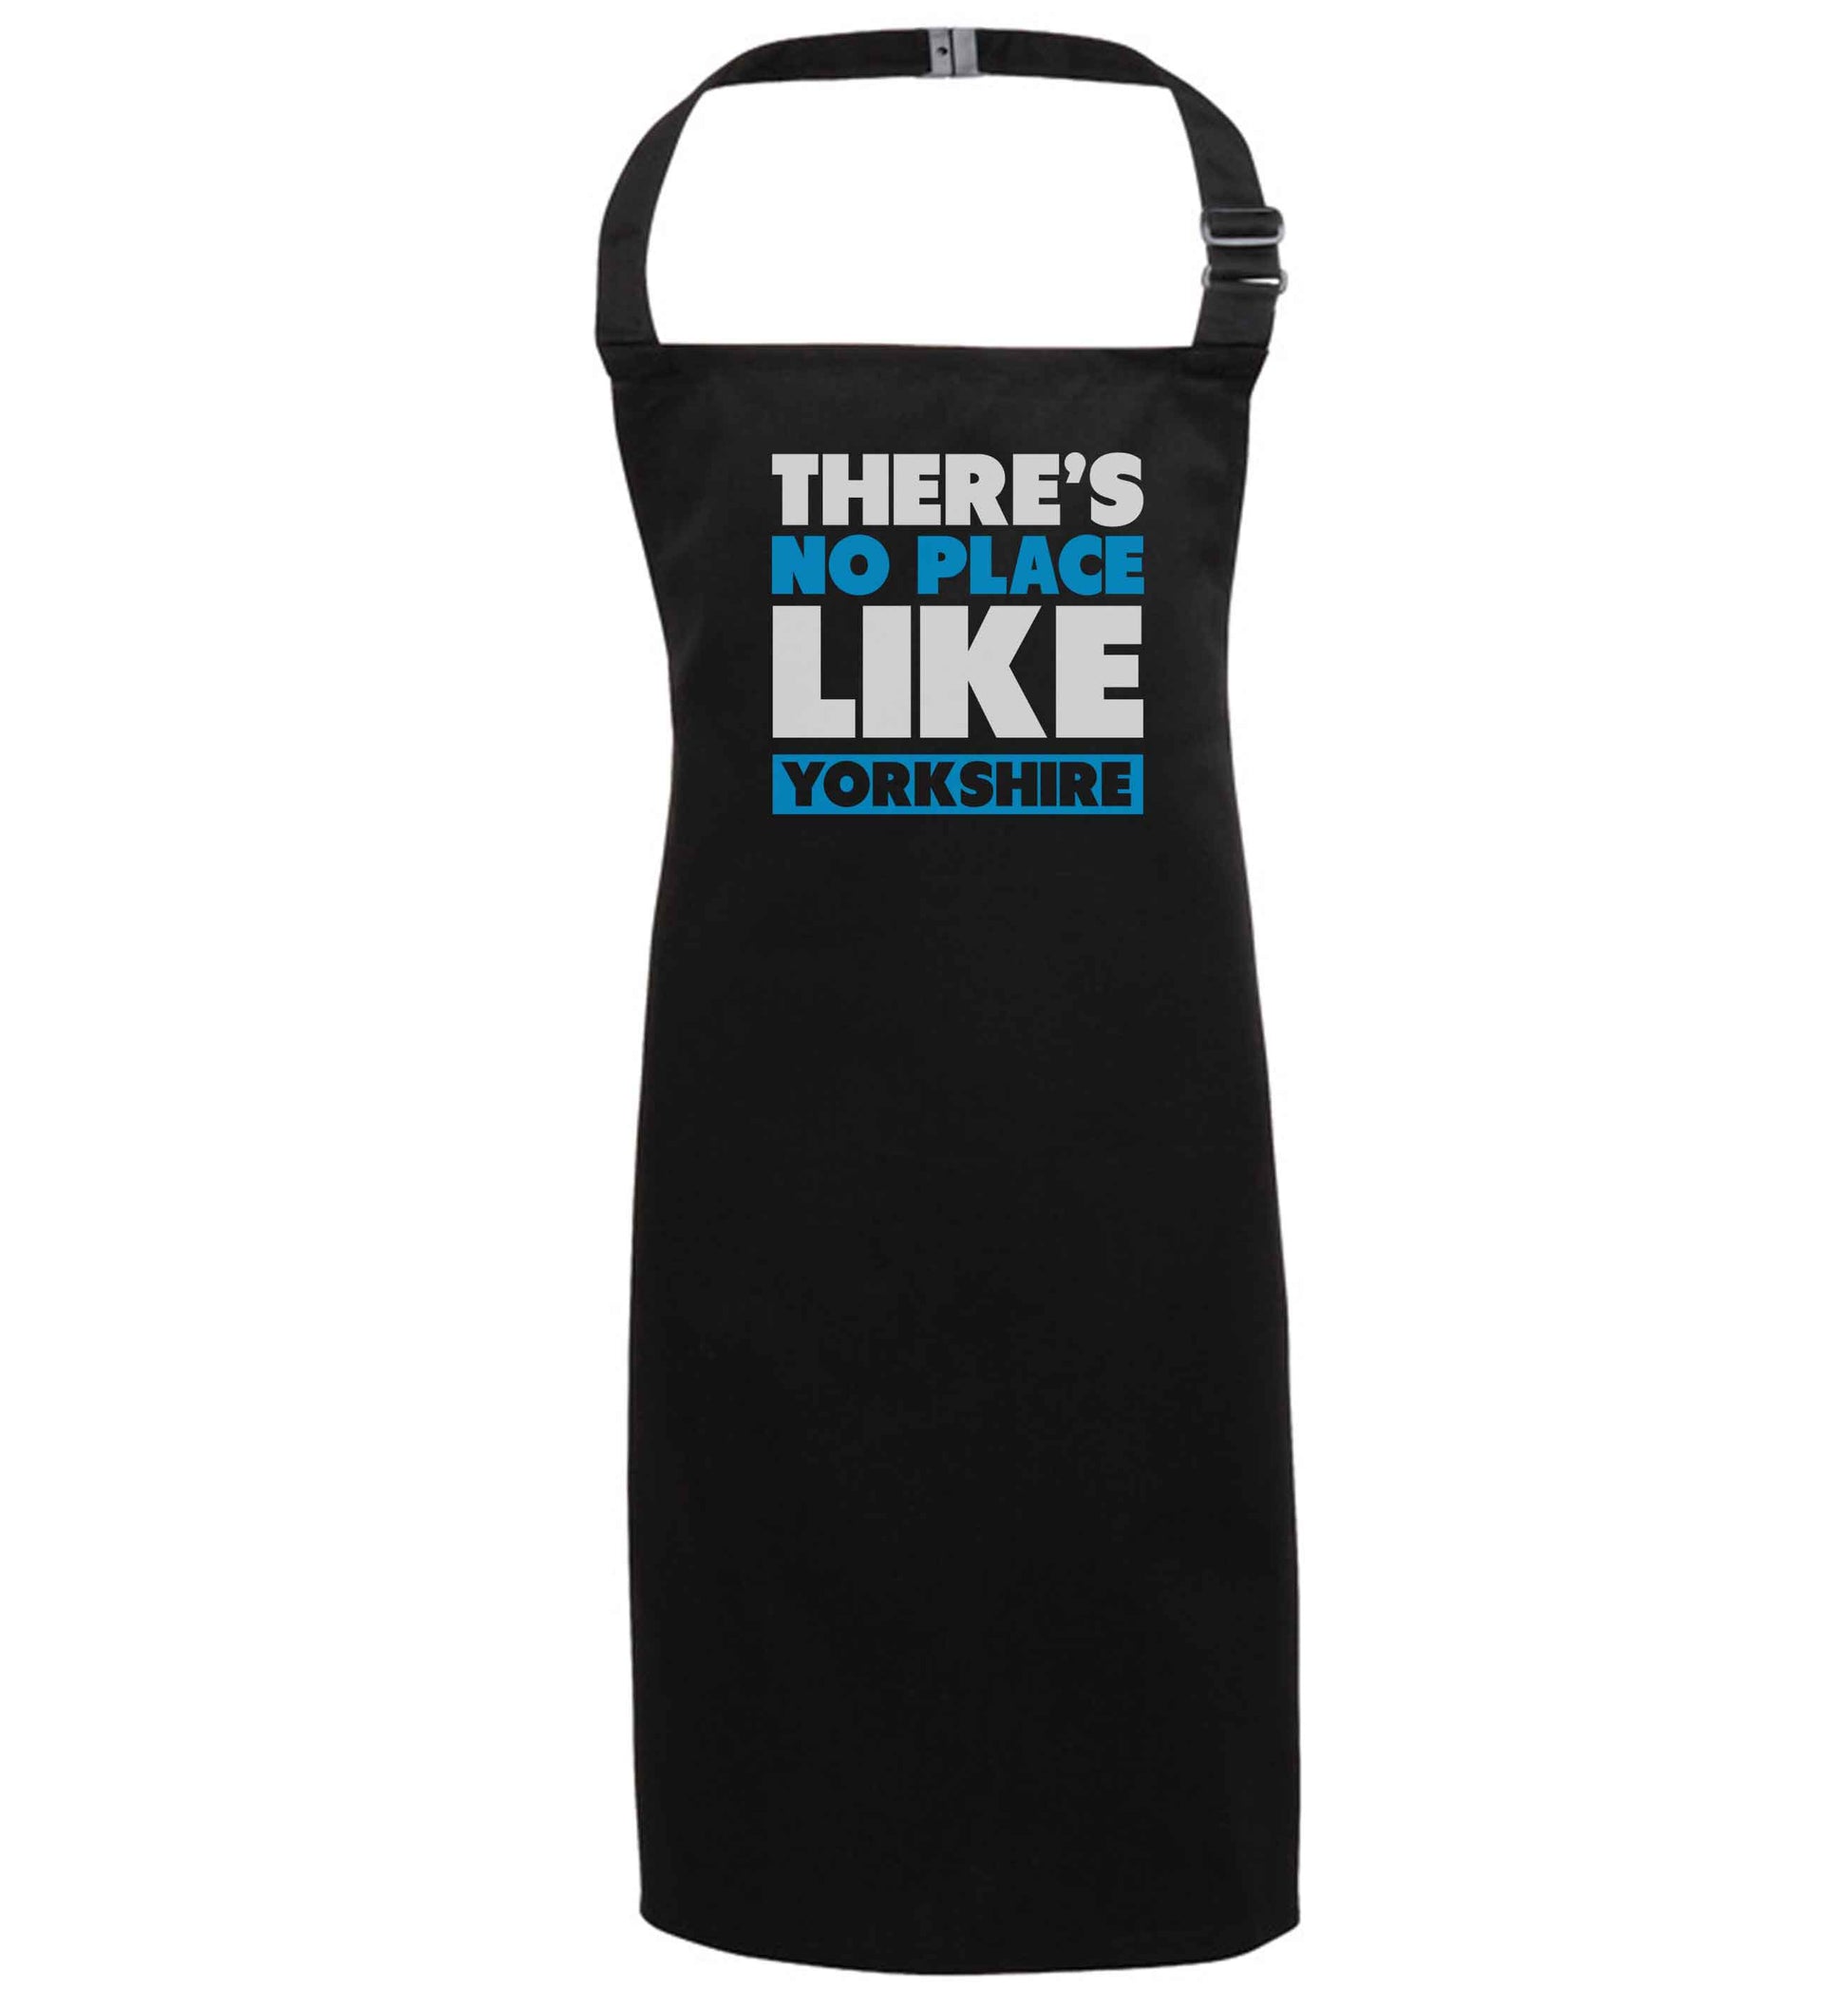 There's no place like Yorkshire black apron 7-10 years